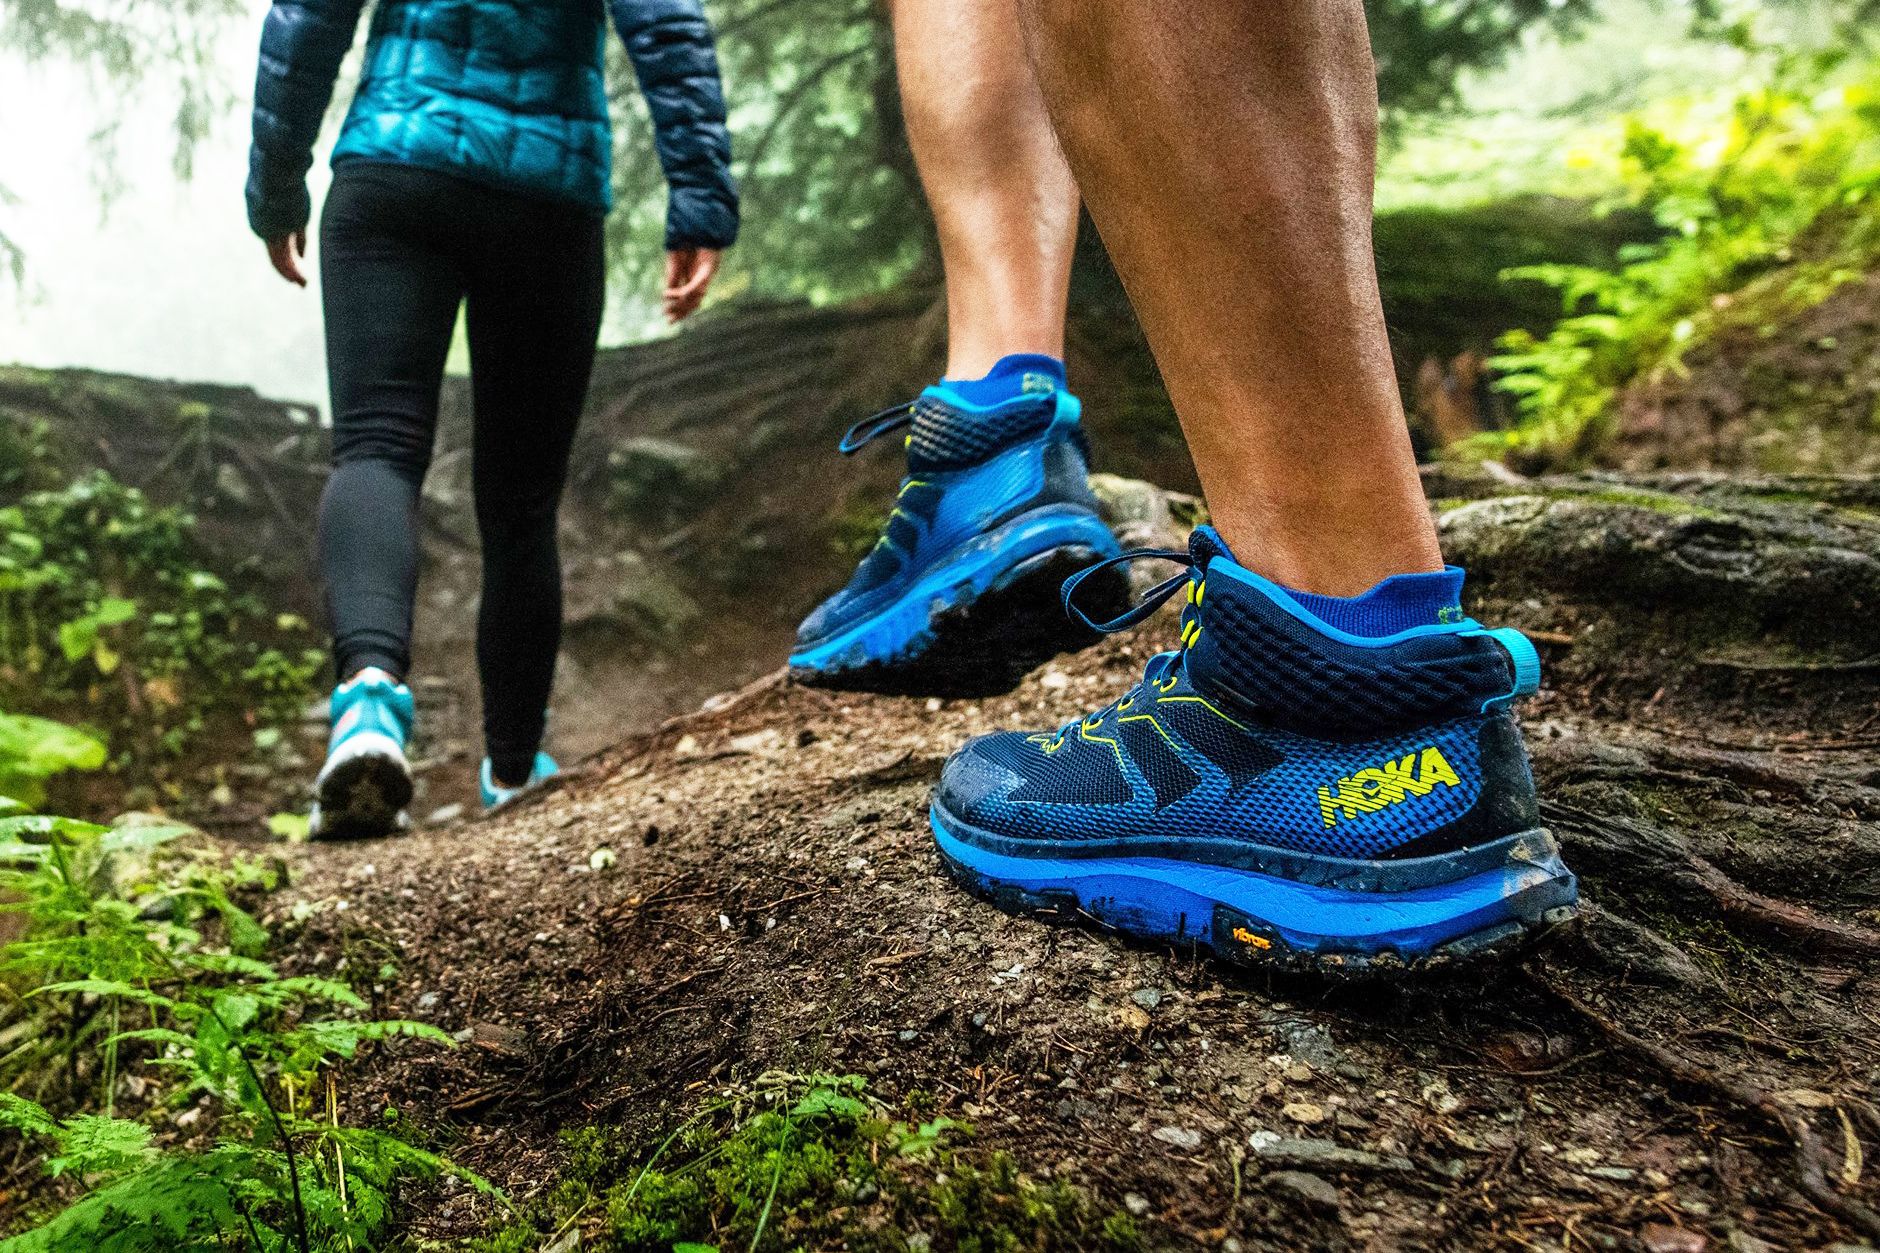 Hoka sneakers are exploding in popularity, boosting Ugg-owner Deckers